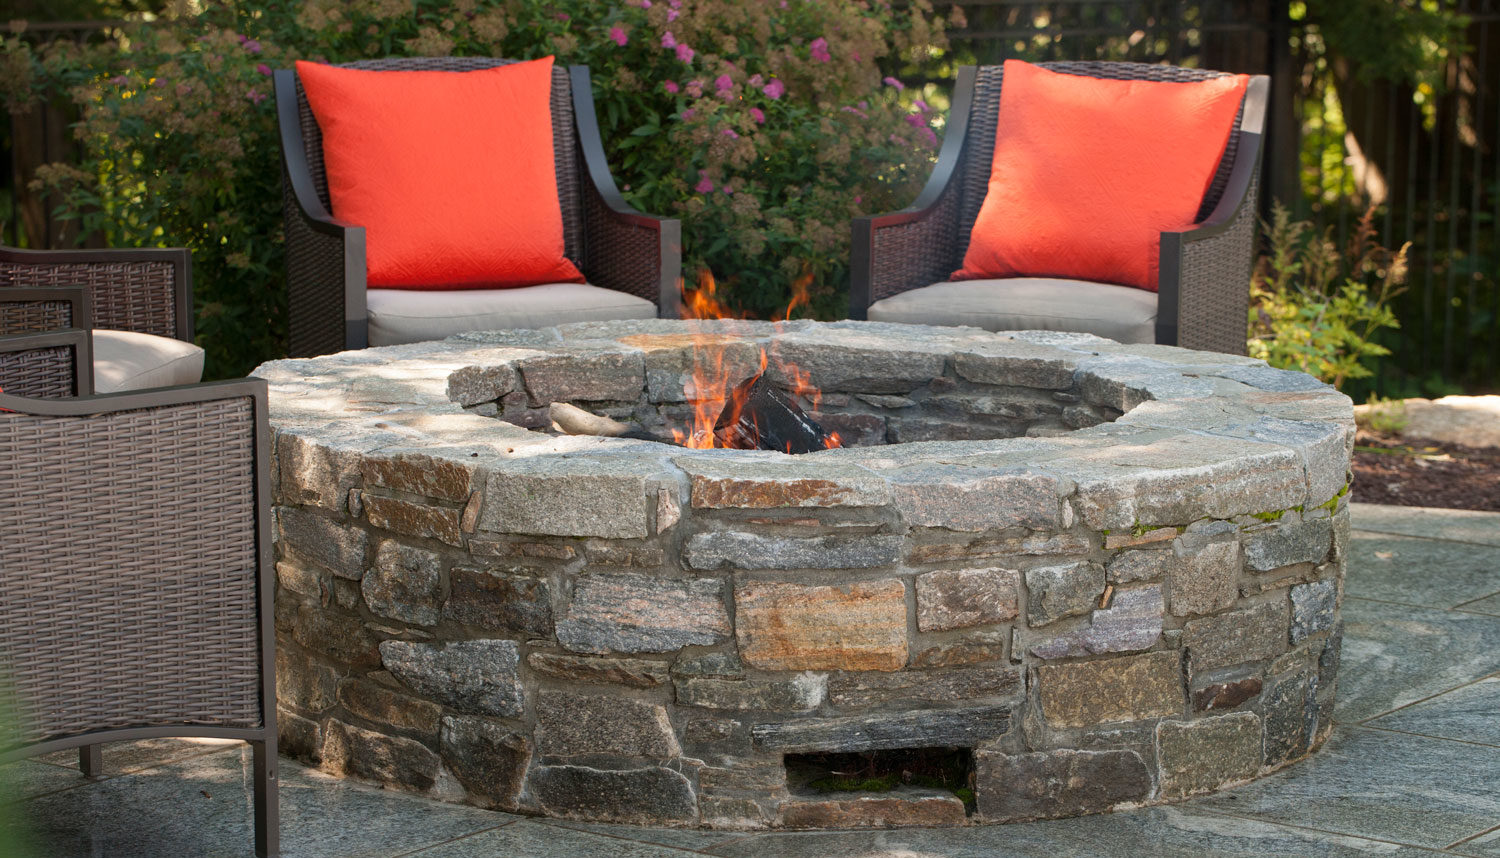 Natural Stone Fire Pit Design, Do You Need Special Stones For A Fire Pit